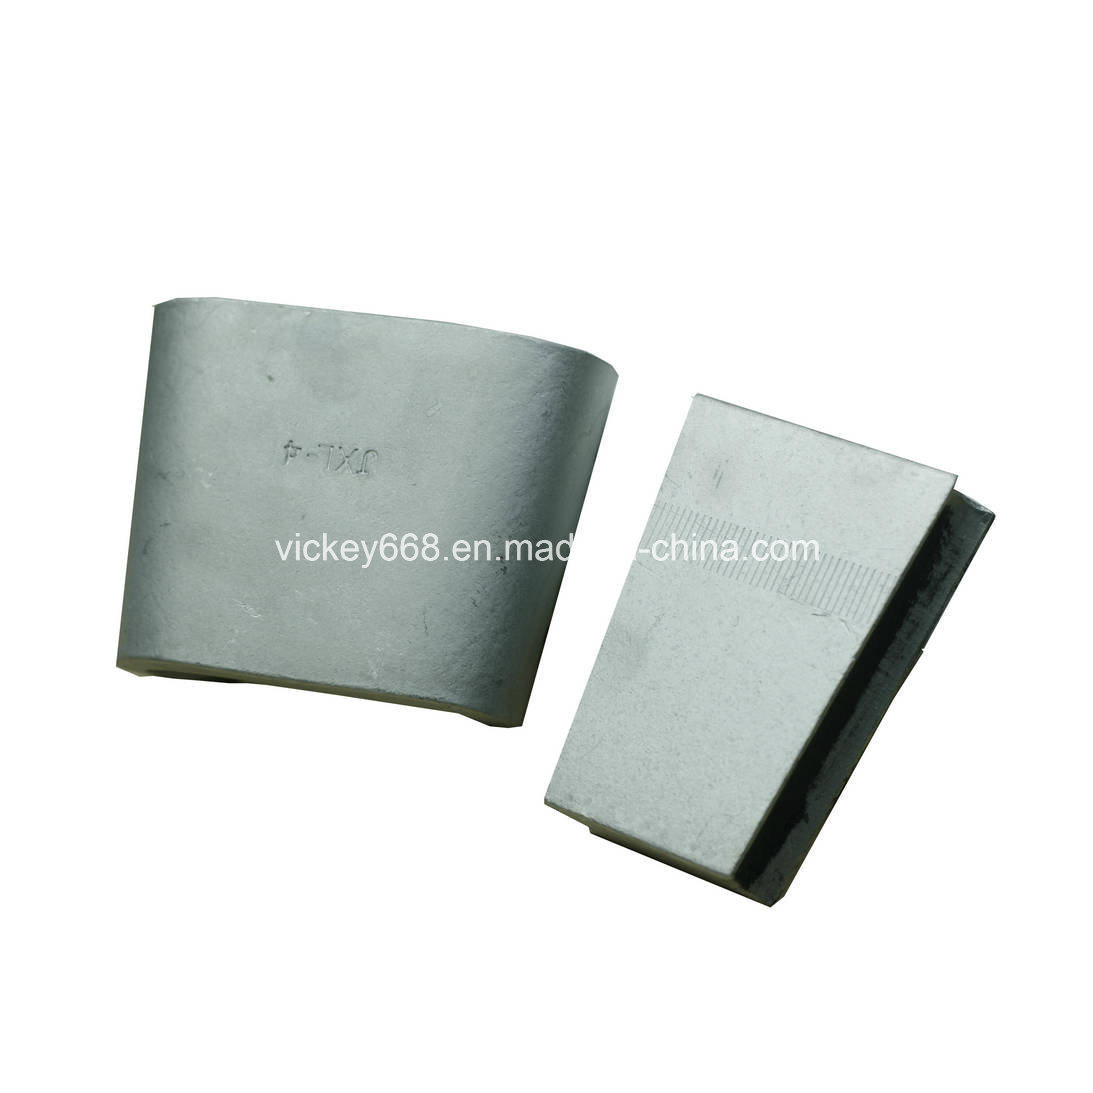 Cable Anpu Clamp, Parallel Groove, Cable Clamp